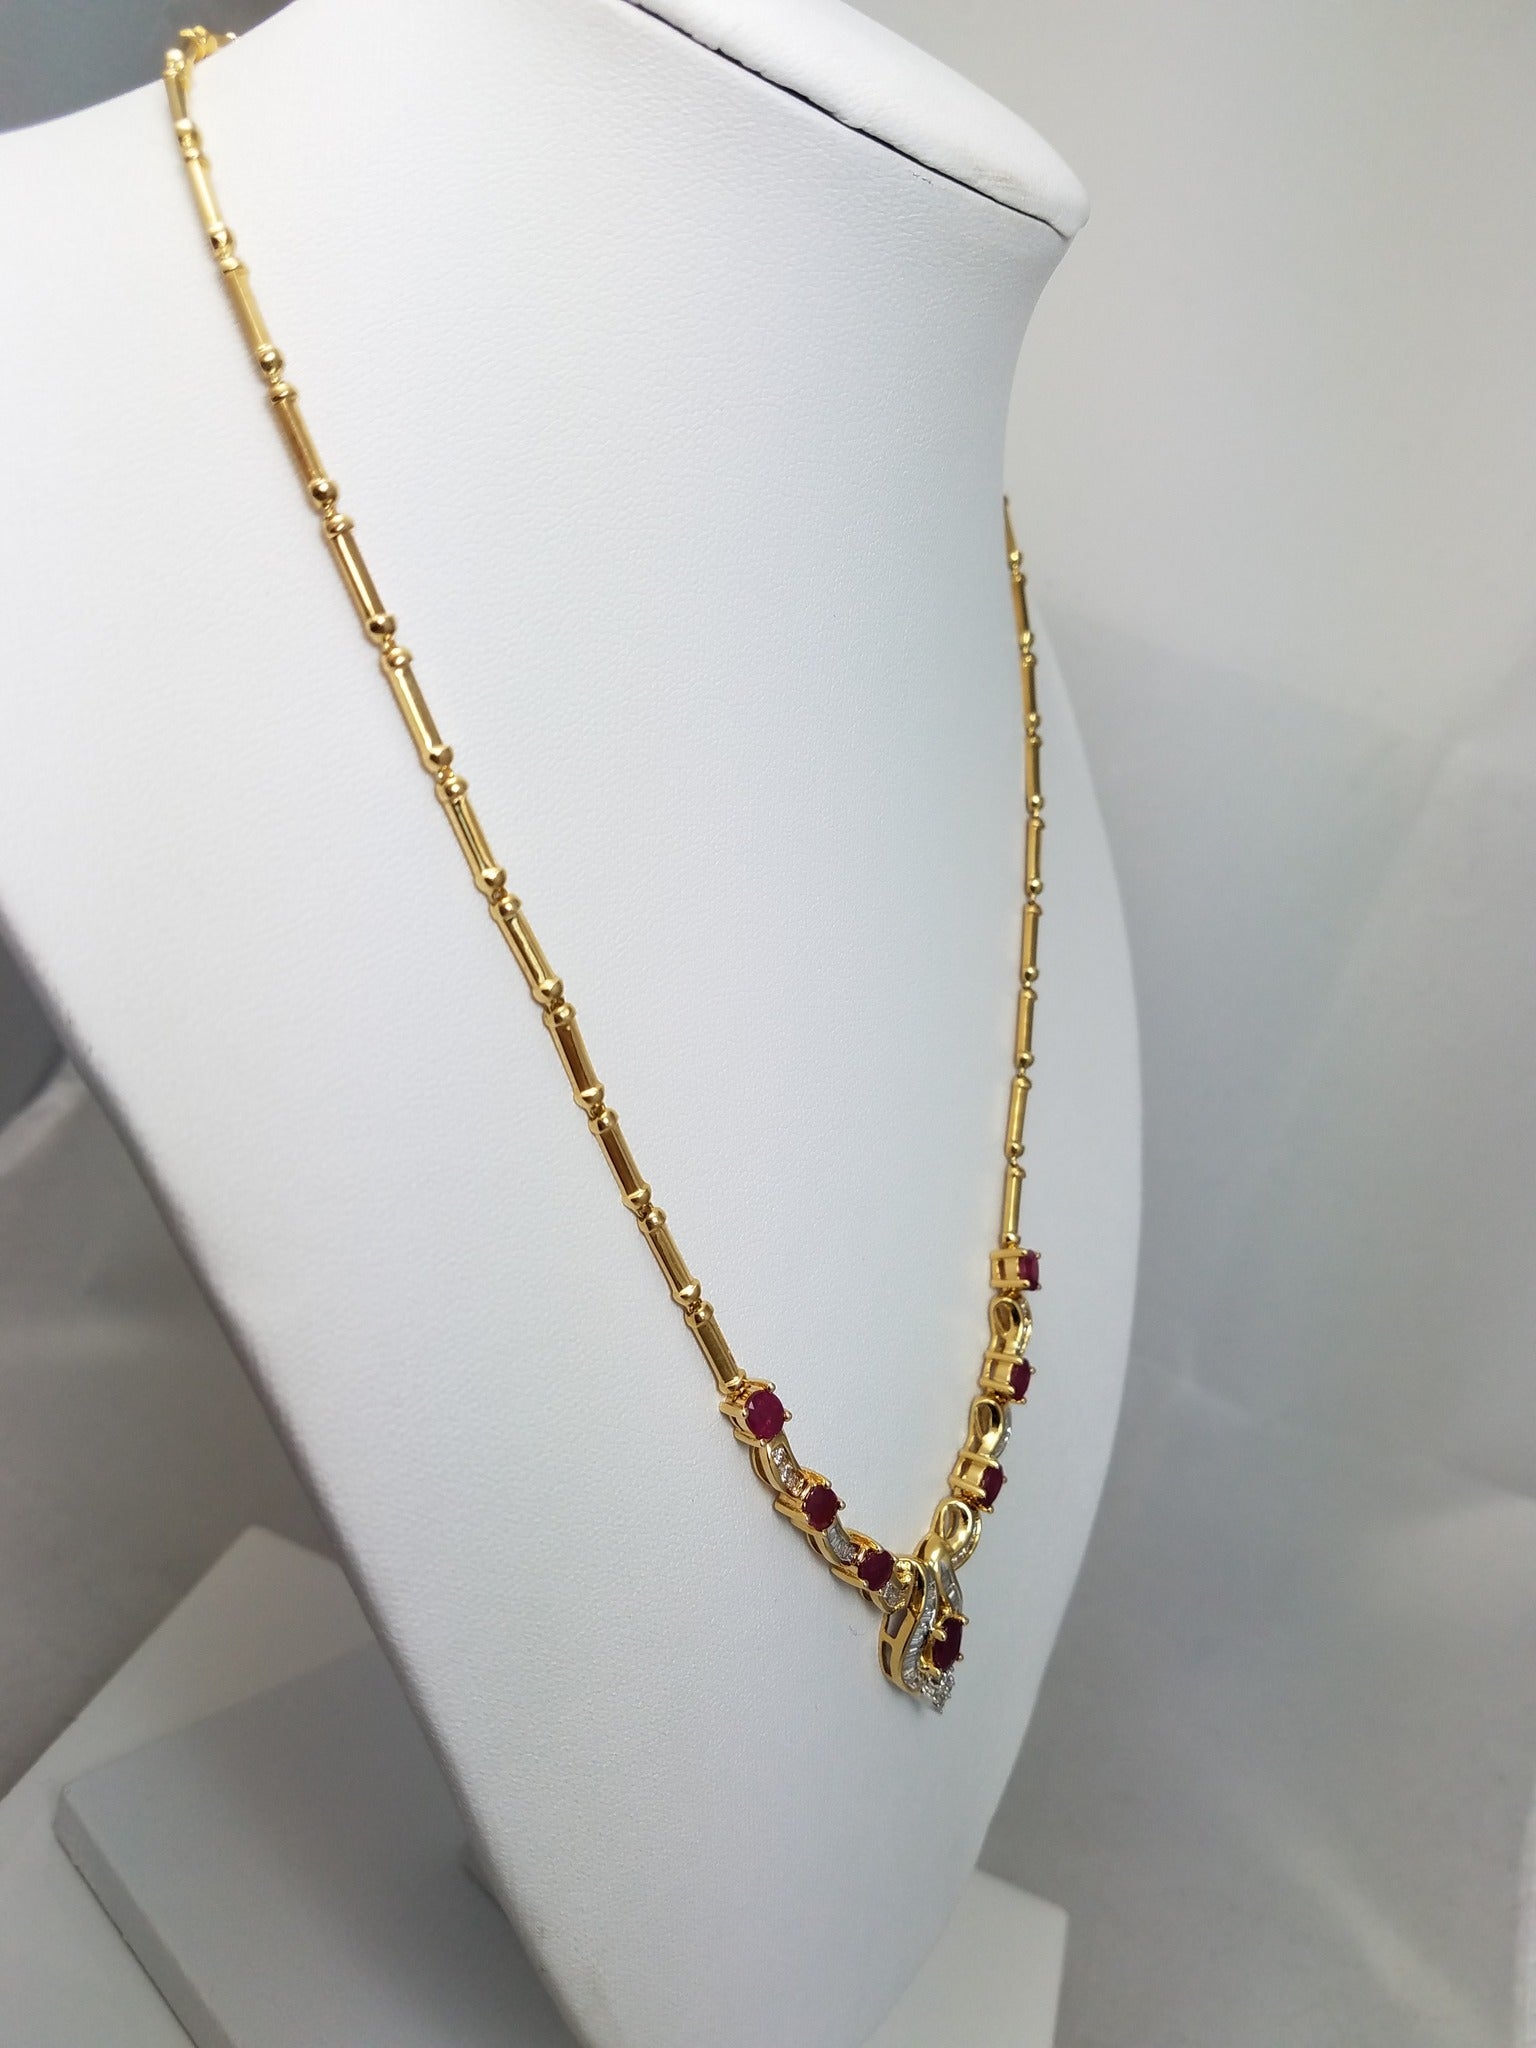 New! 18" 18k Yellow Gold 3.50ctw Natural Ruby Diamond Necklace